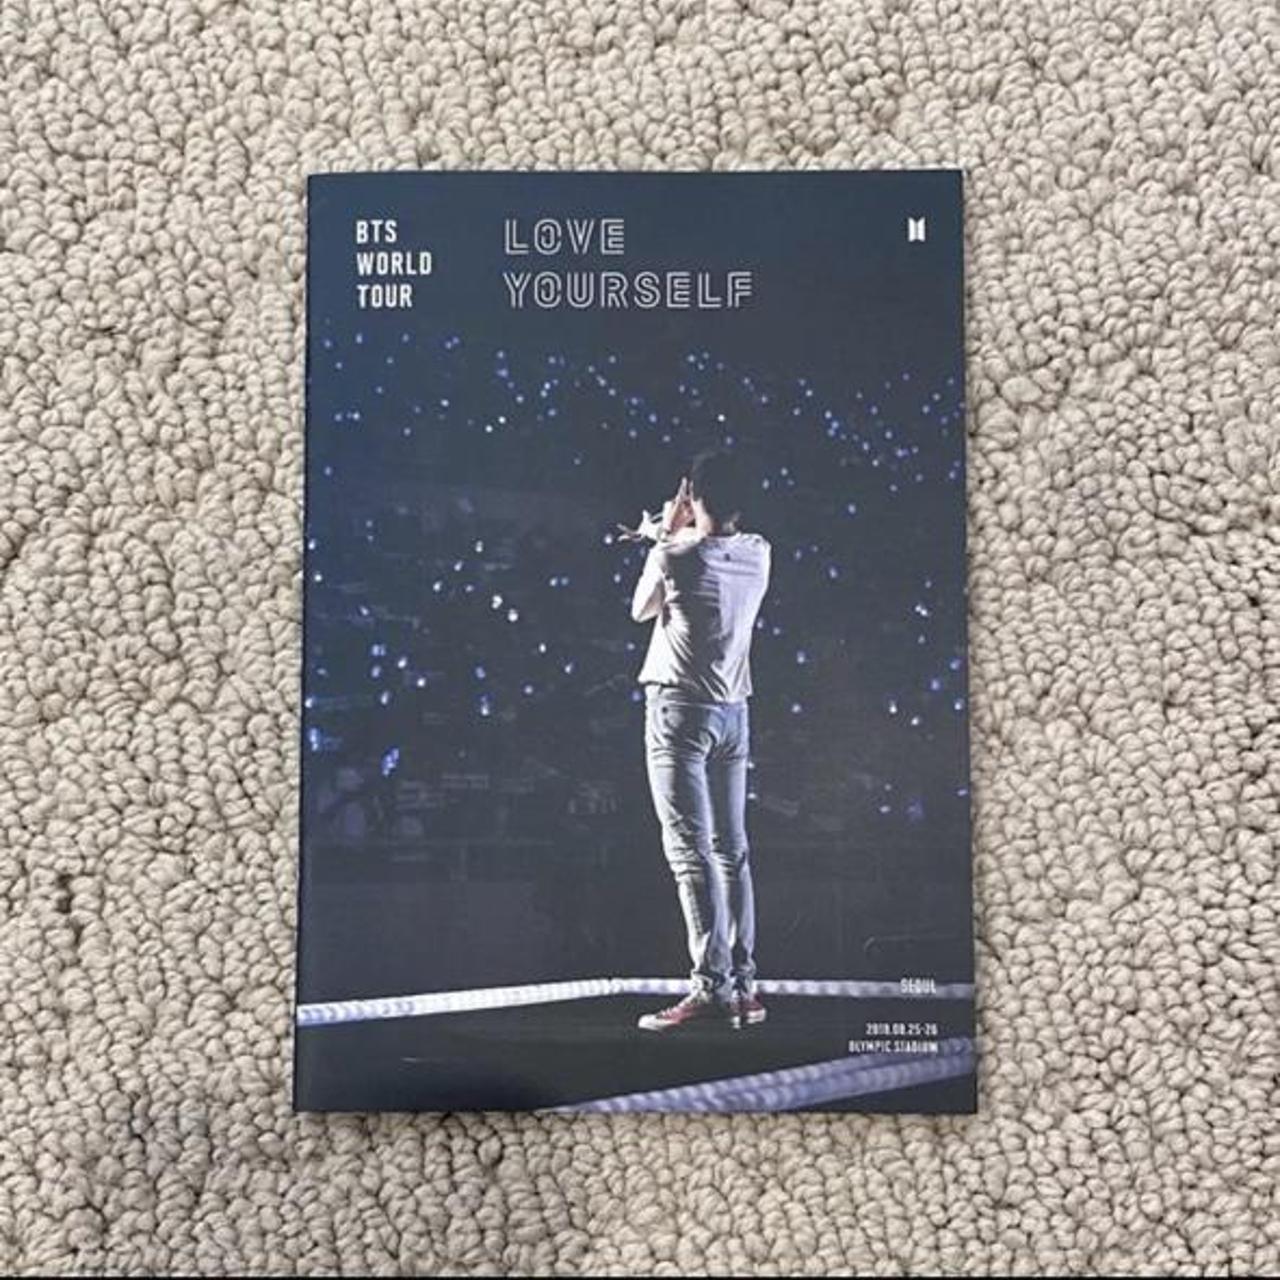 Official BTS Love Yourself Seoul Blu-Ray RM... - Depop